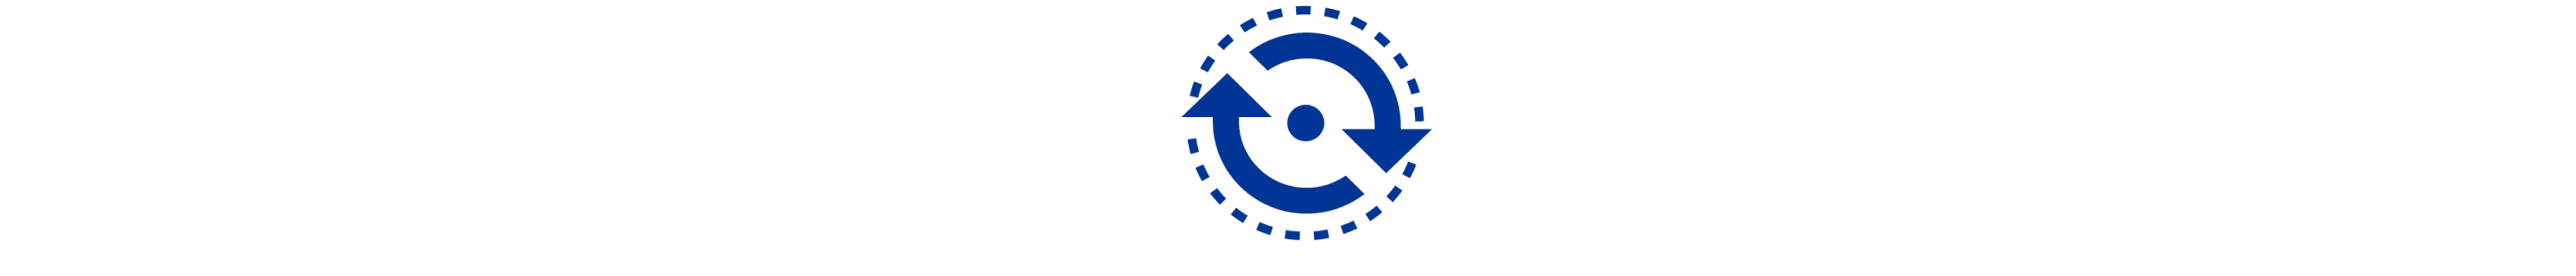 A blue icon that shows jagged lines and 2 arrows surrounding a small circle